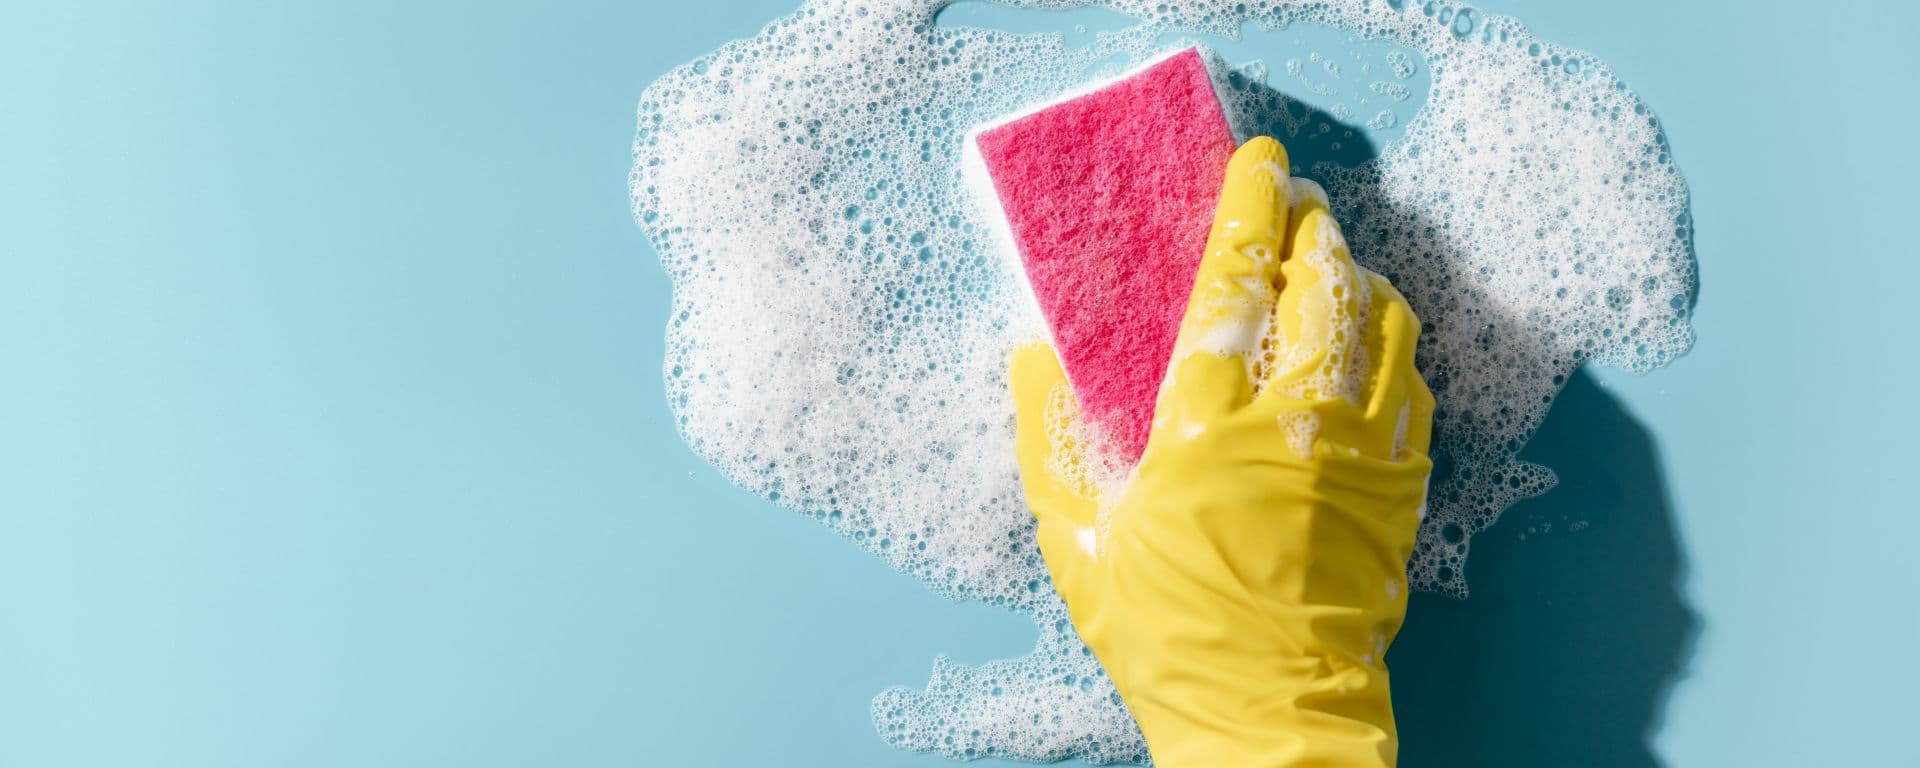 Hand in a yellow rubber glove holds a cleaning sponge and wipes a soapy foam on a blue background.